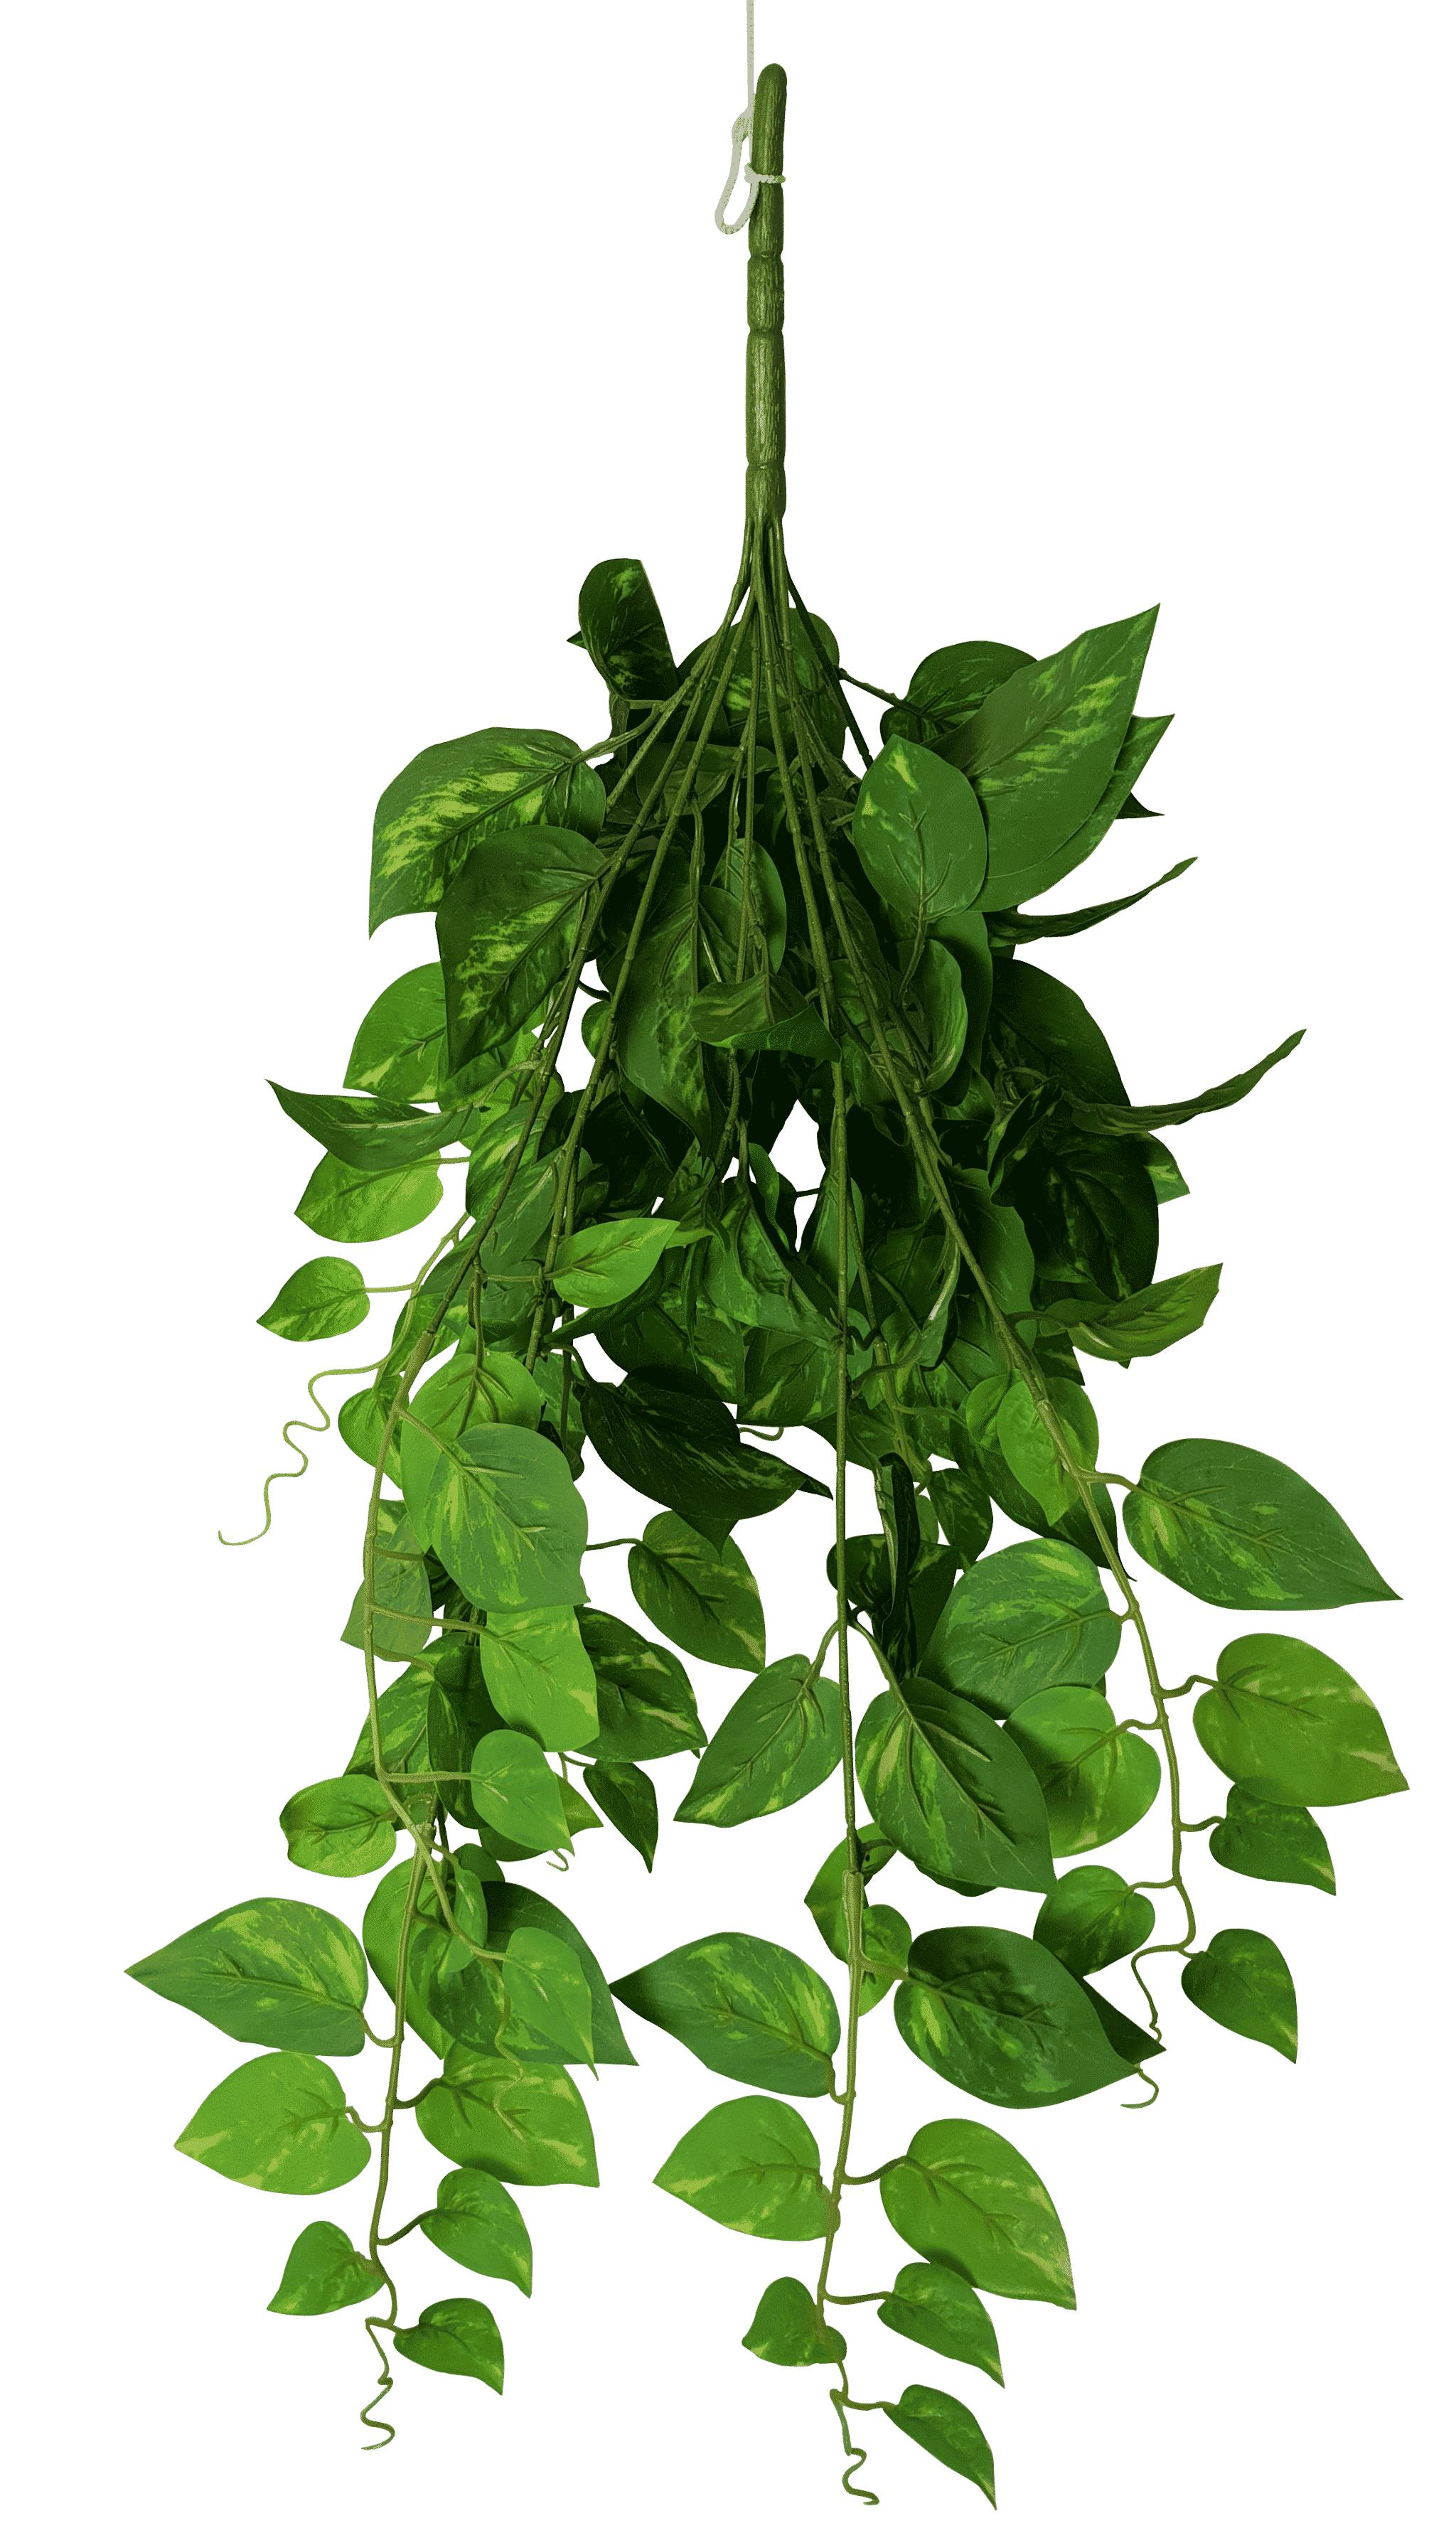 Heart Leaf Philodendron Hanging Creeper Bush 73cm ...